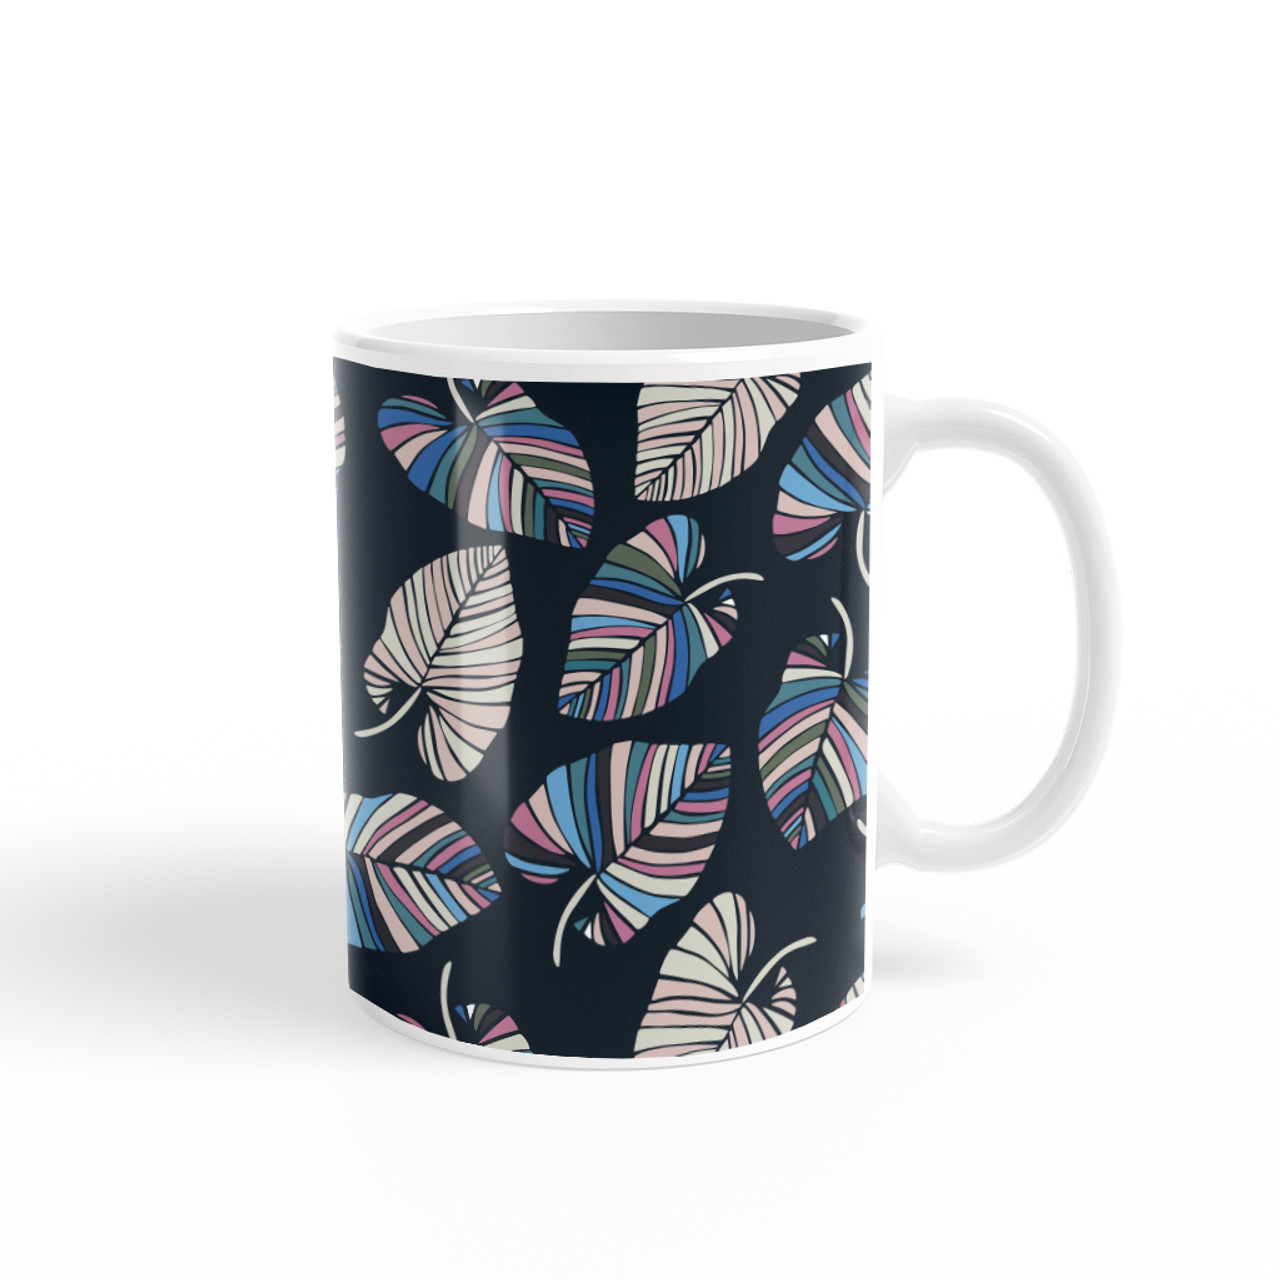 https://cdn11.bigcommerce.com/s-2cuw7zia22/images/stencil/1280x1280/products/2812/3912/trendy_leaves_seamless_pattern_11oz_Mug_Right_Handle__47433.1633005891.jpg?c=1